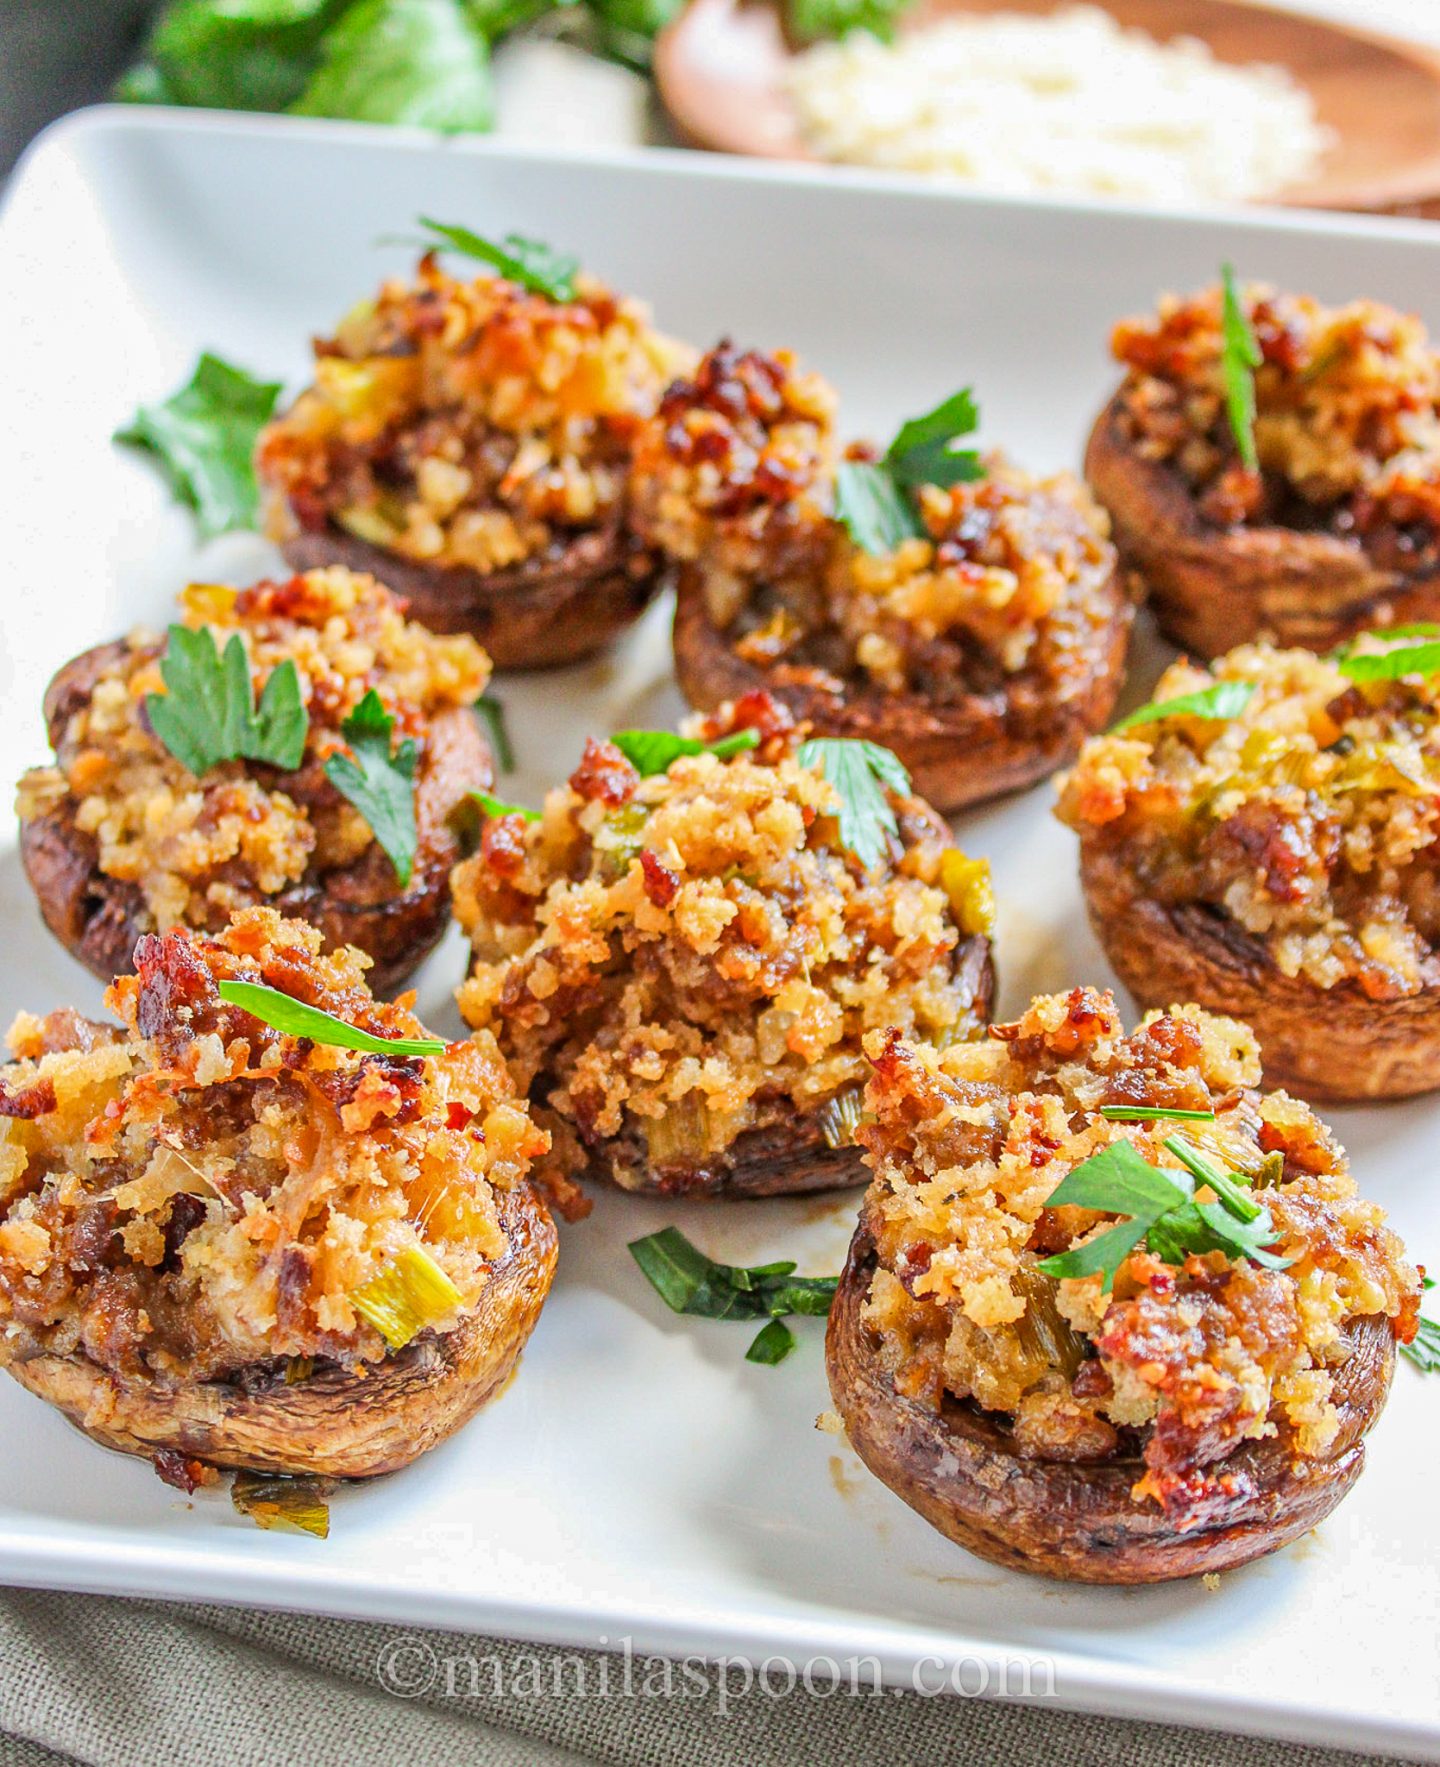 Stuffed Mushrooms with Sausage and Cheese